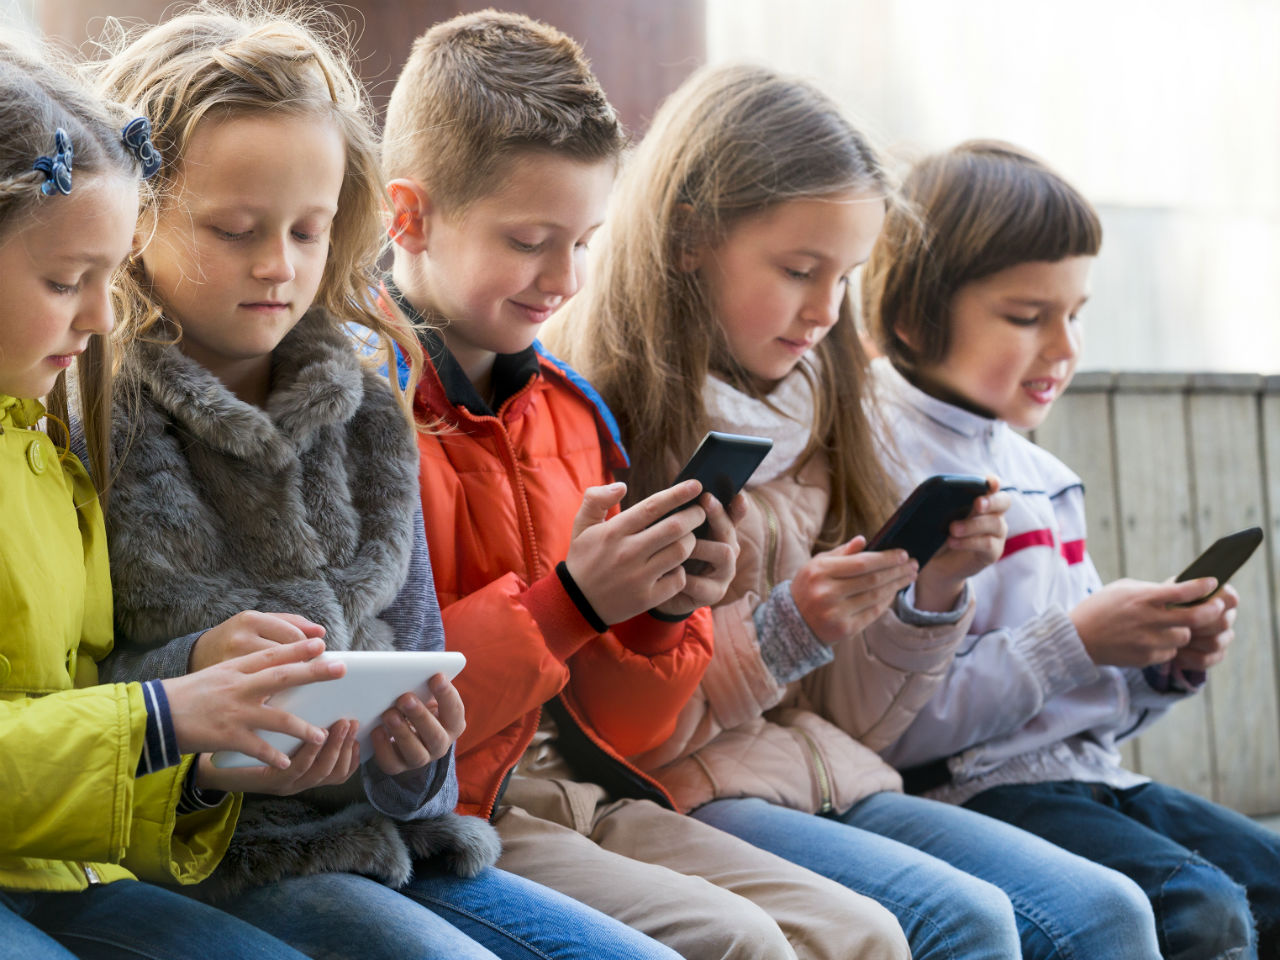 The Impact of Mobile Technology on our Children